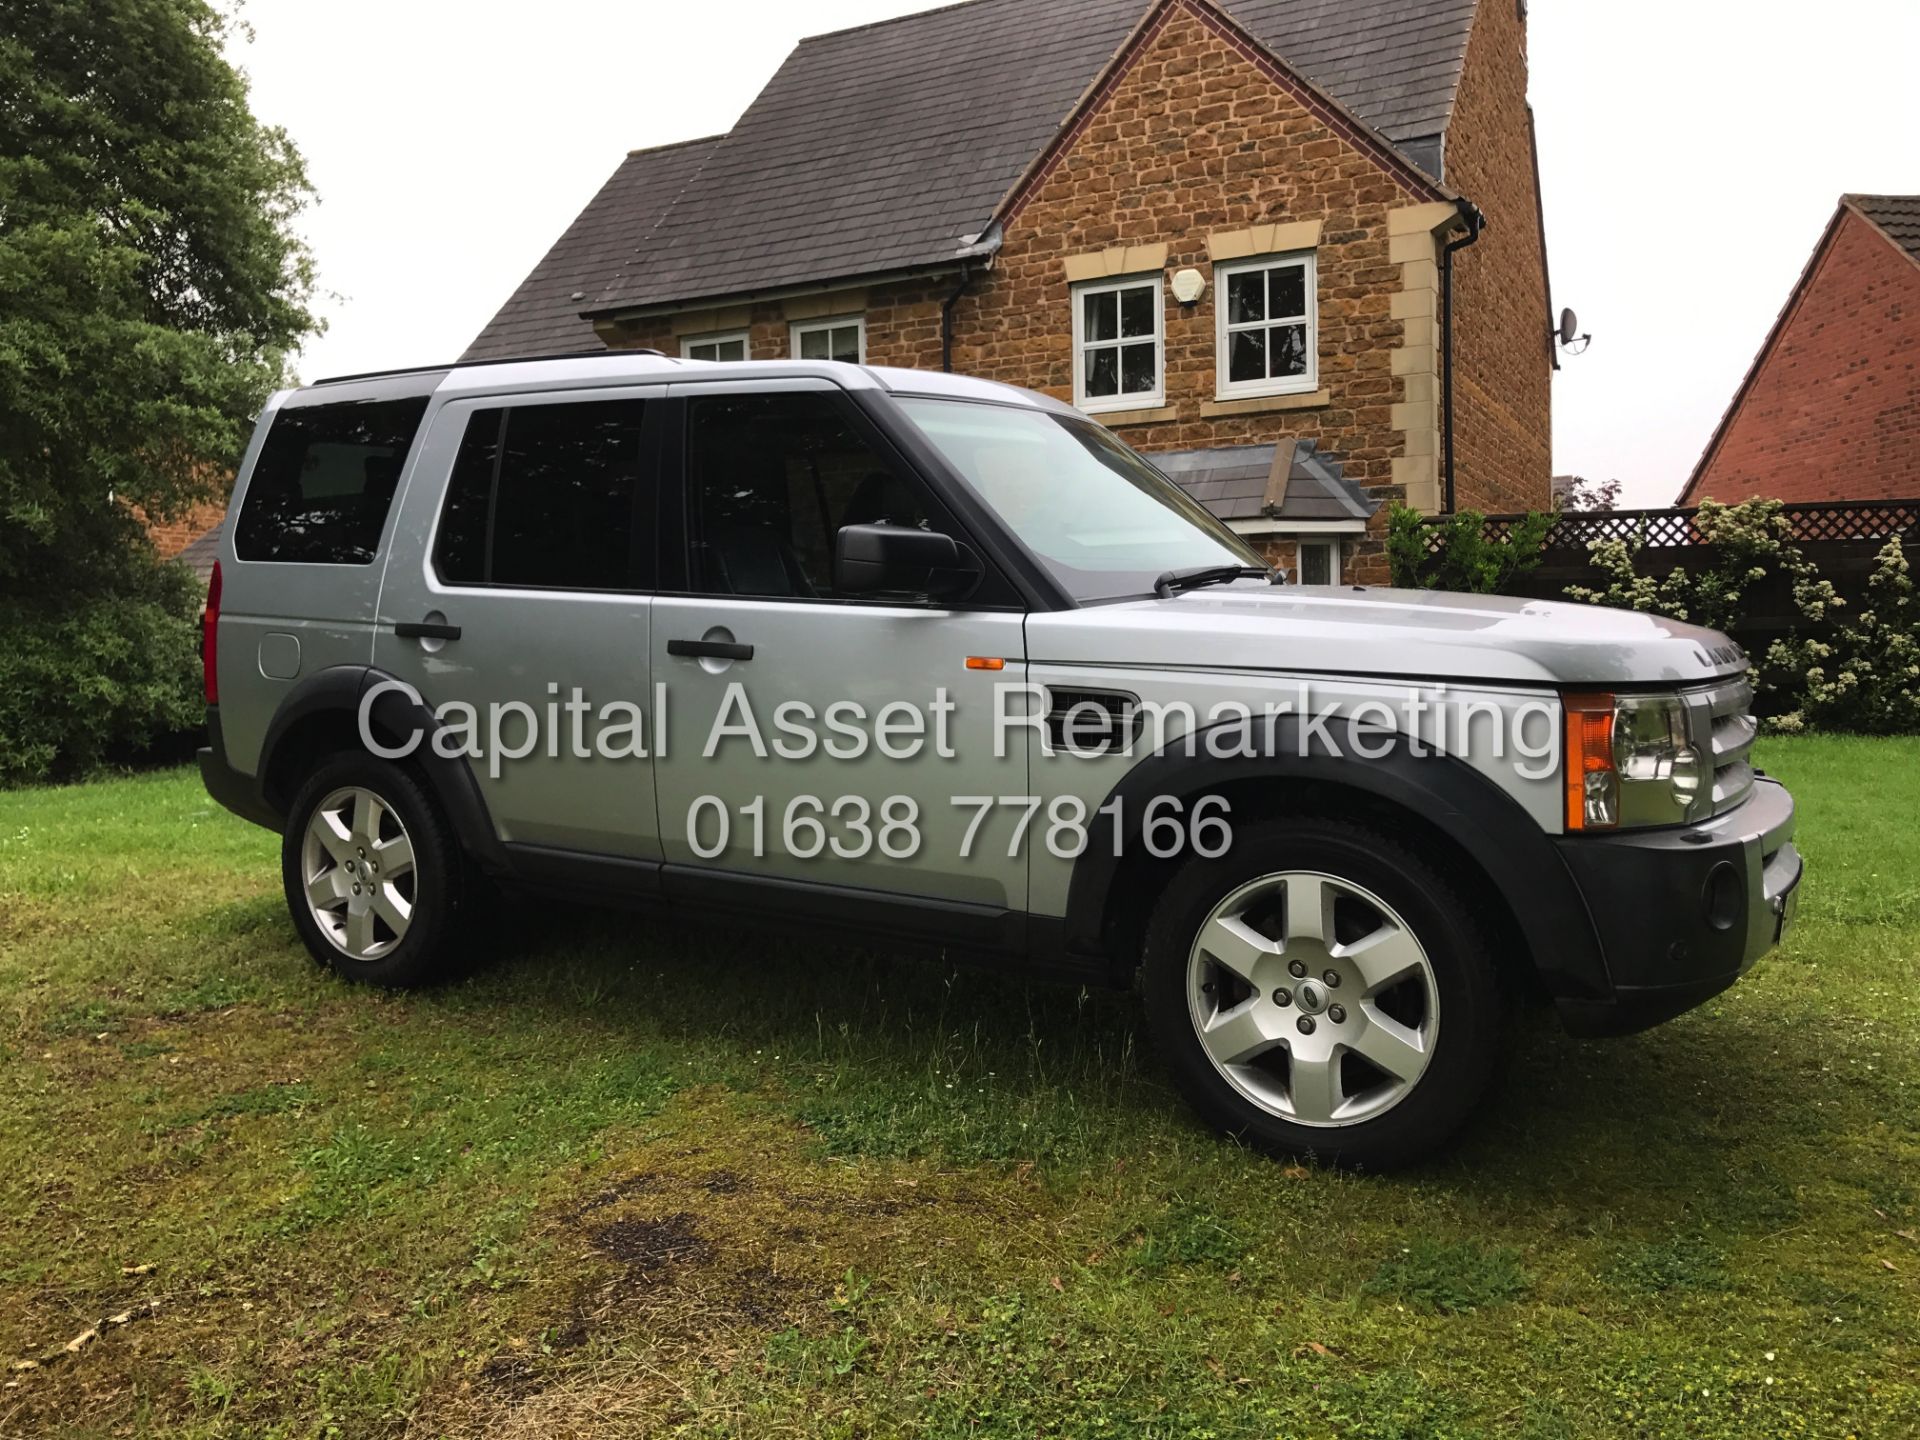 On Sale LAND ROVER DISCOVERY TDV6 "HSE" 7 SEATER - MASSIVE SPEC - SAT NAV -LEATHER -ELEC EVERYTHING